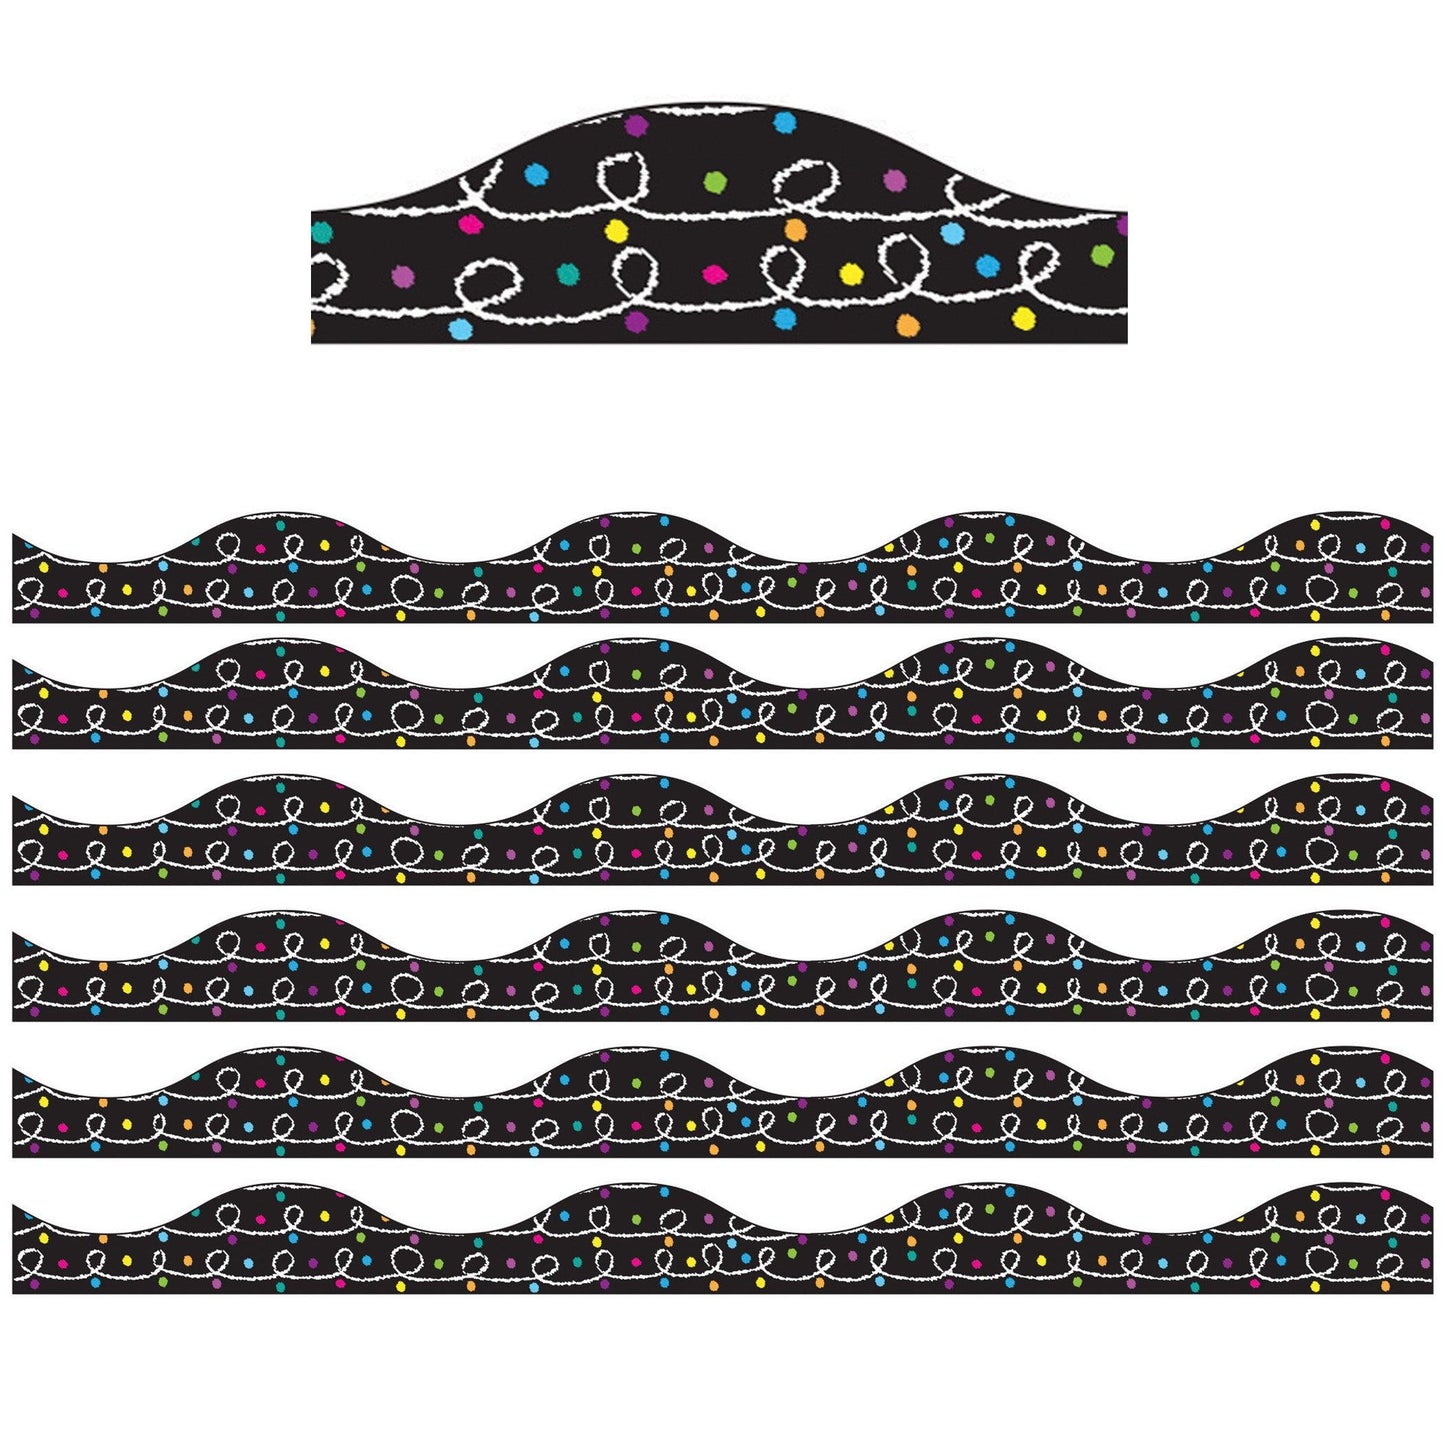 Magnetic Scallop Border, White Chalk Loops with Color Chalk Dots on Black, 12 Feet Per Pack, 6 Packs - Loomini